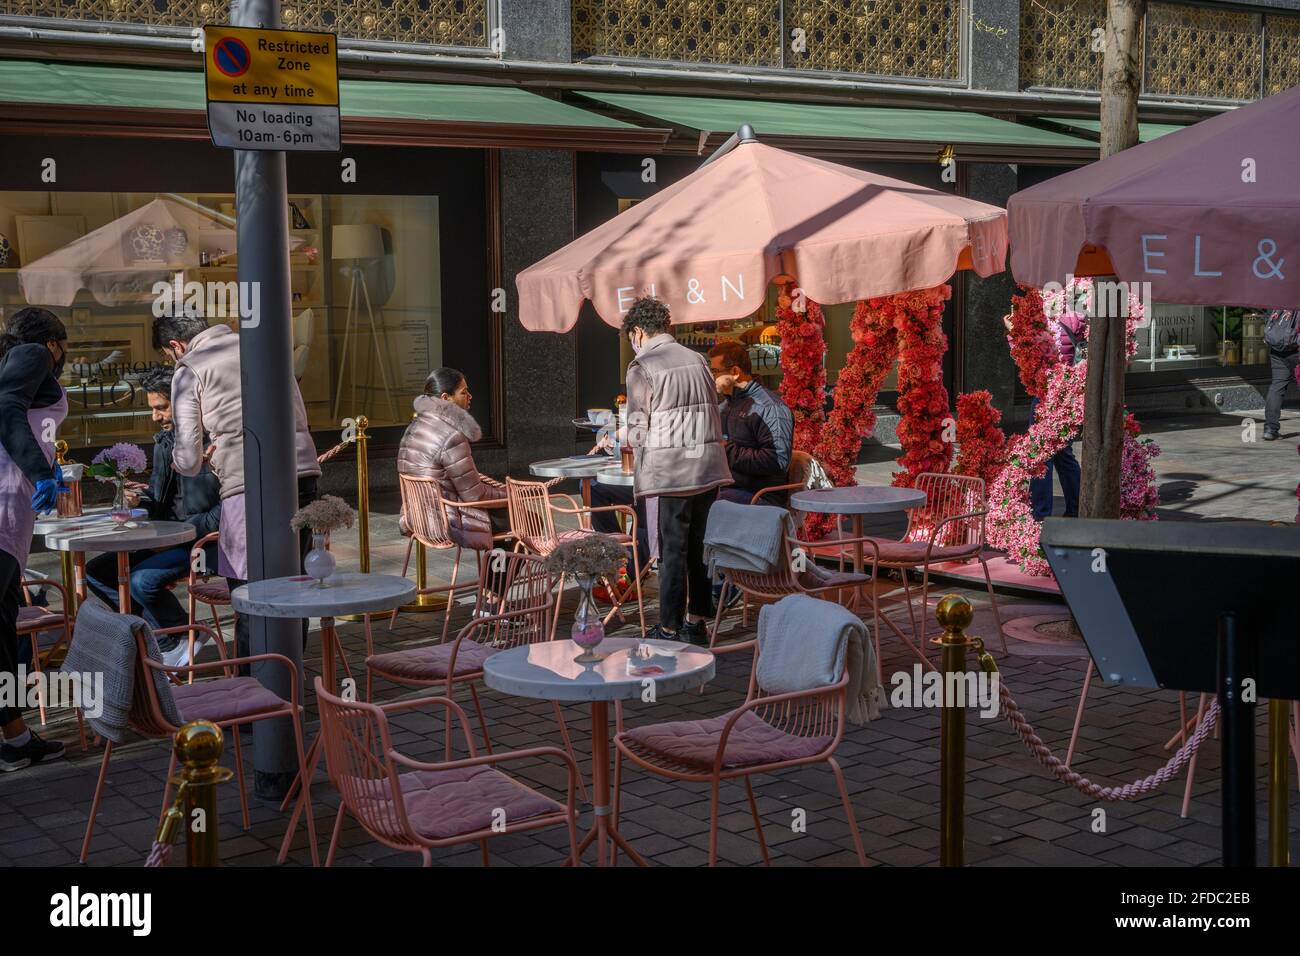 ELAN outdoor cafe area on Hans Crescent outside Harrods, 23 April 2021, Knightsbridge, London during Covid-19 restriction easing Stock Photo